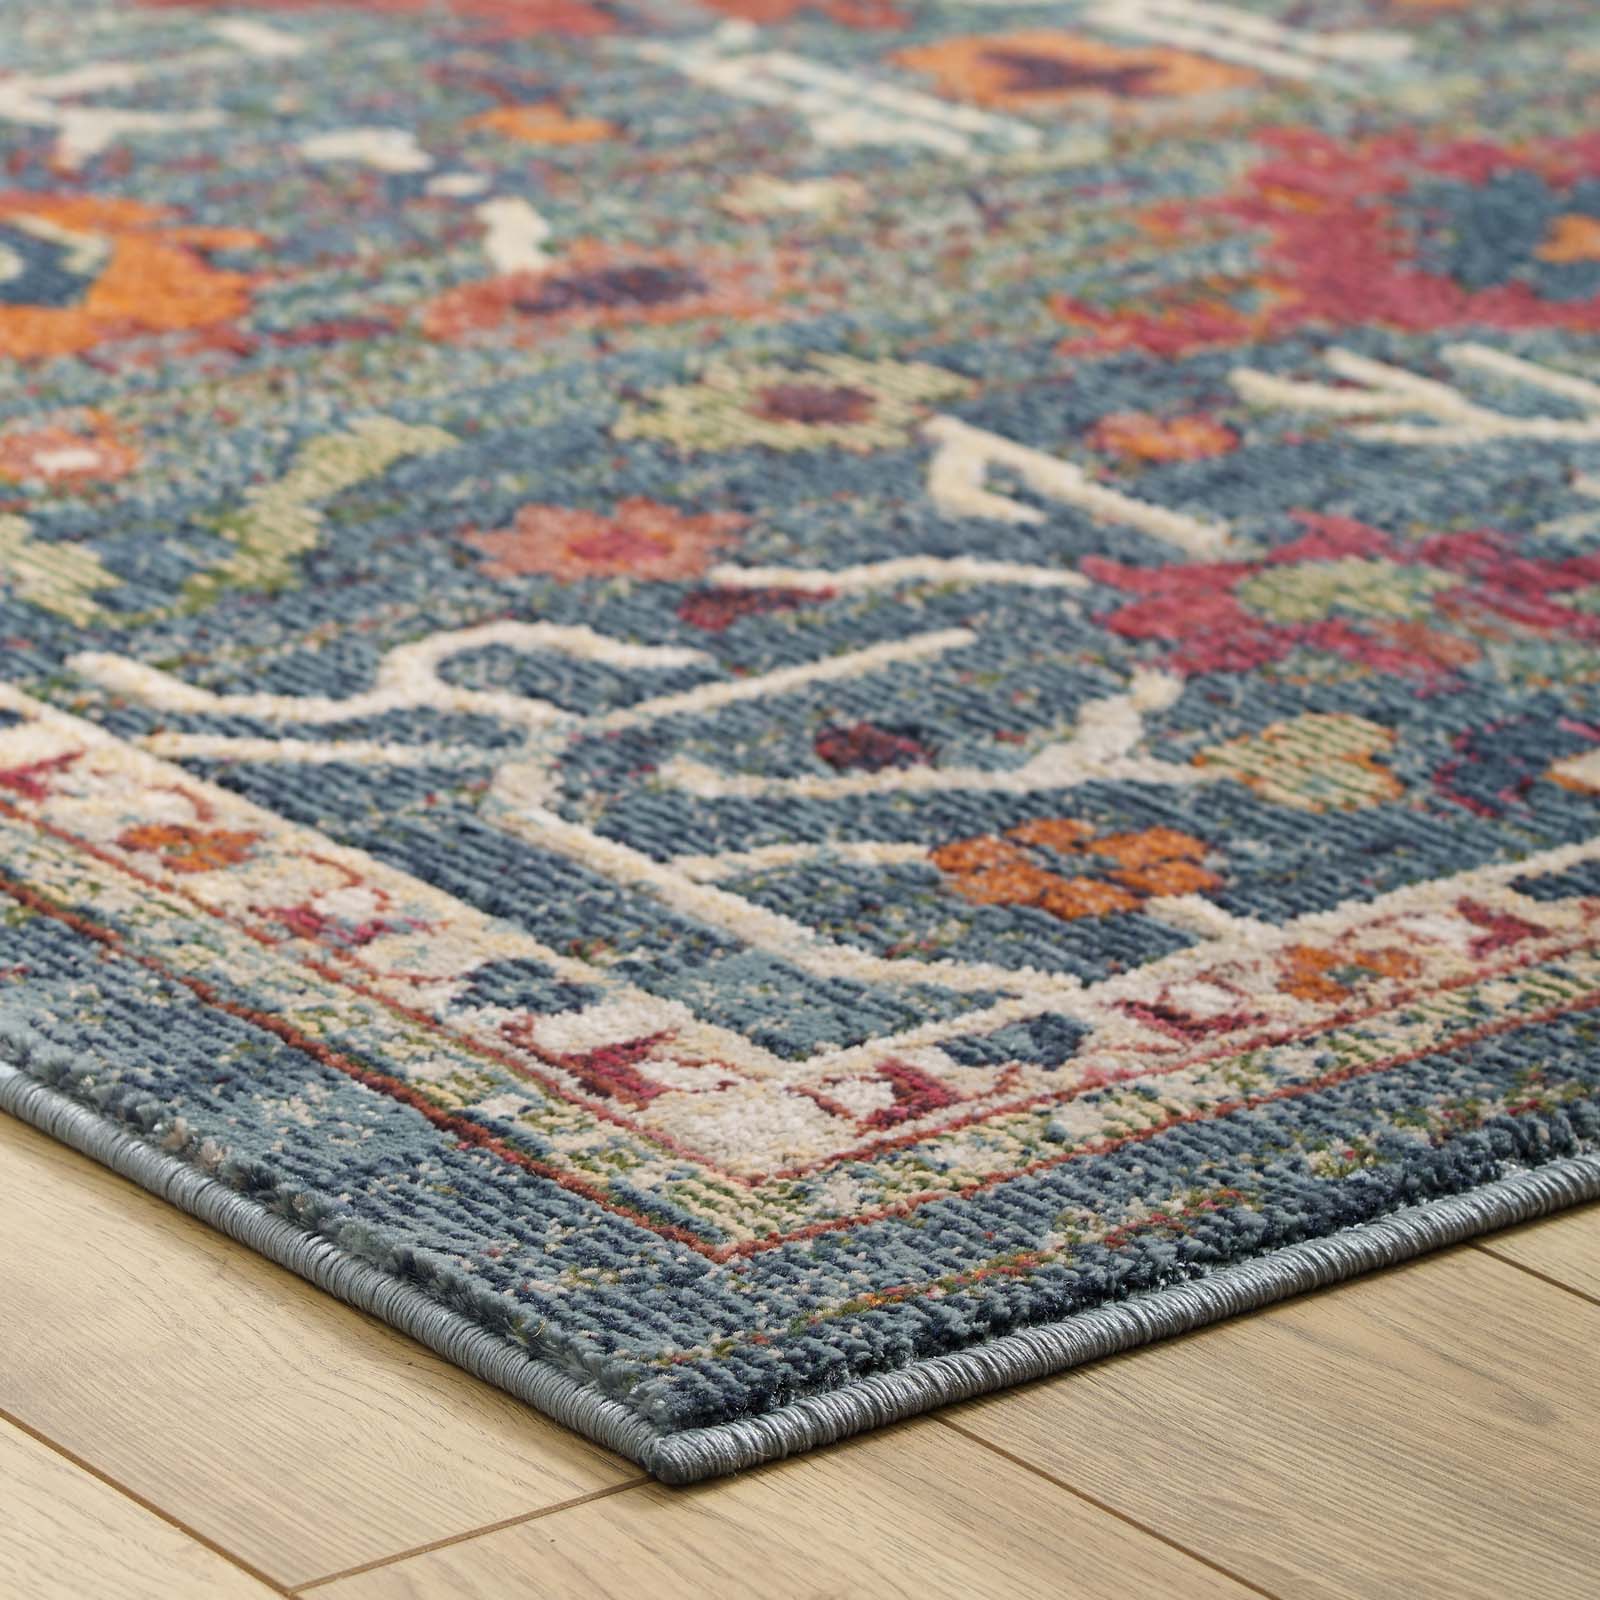 Modway Indoor Rugs - Tribute Every Distressed Vintage Floral 5x8 Area Rug Multicolored